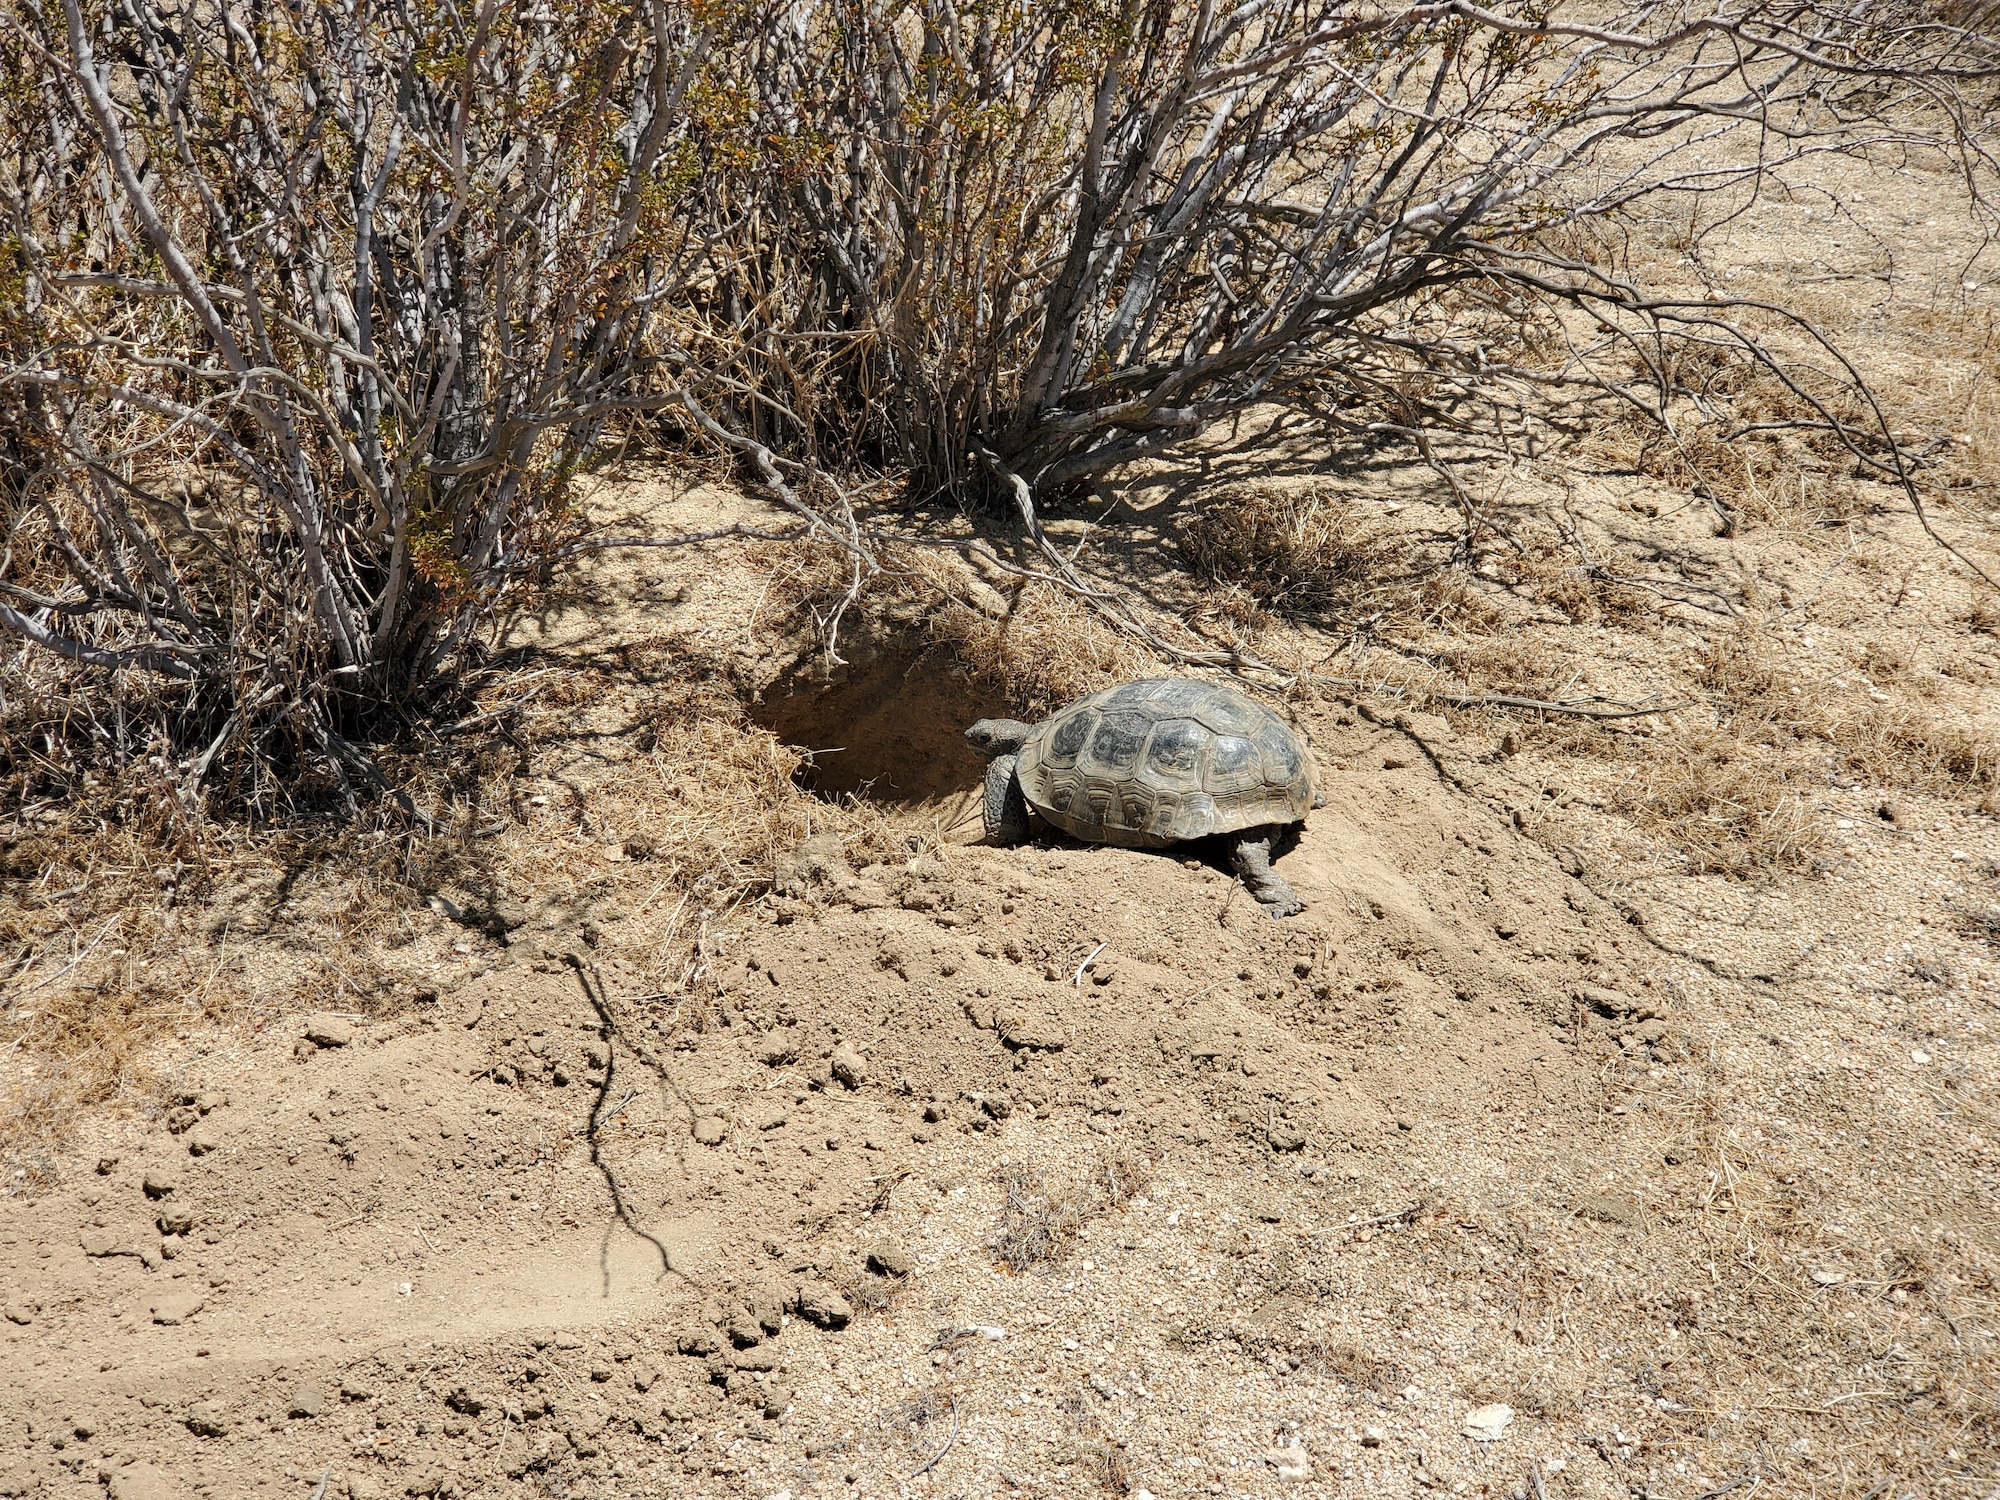 Kali the desert tortoise finds a freshly dug burrow as she makes her way back into the wild following six months of medical and rehabilitative care from injuries she received in a collision with a car late last year. (Air Force photo by Misty Hailstone)